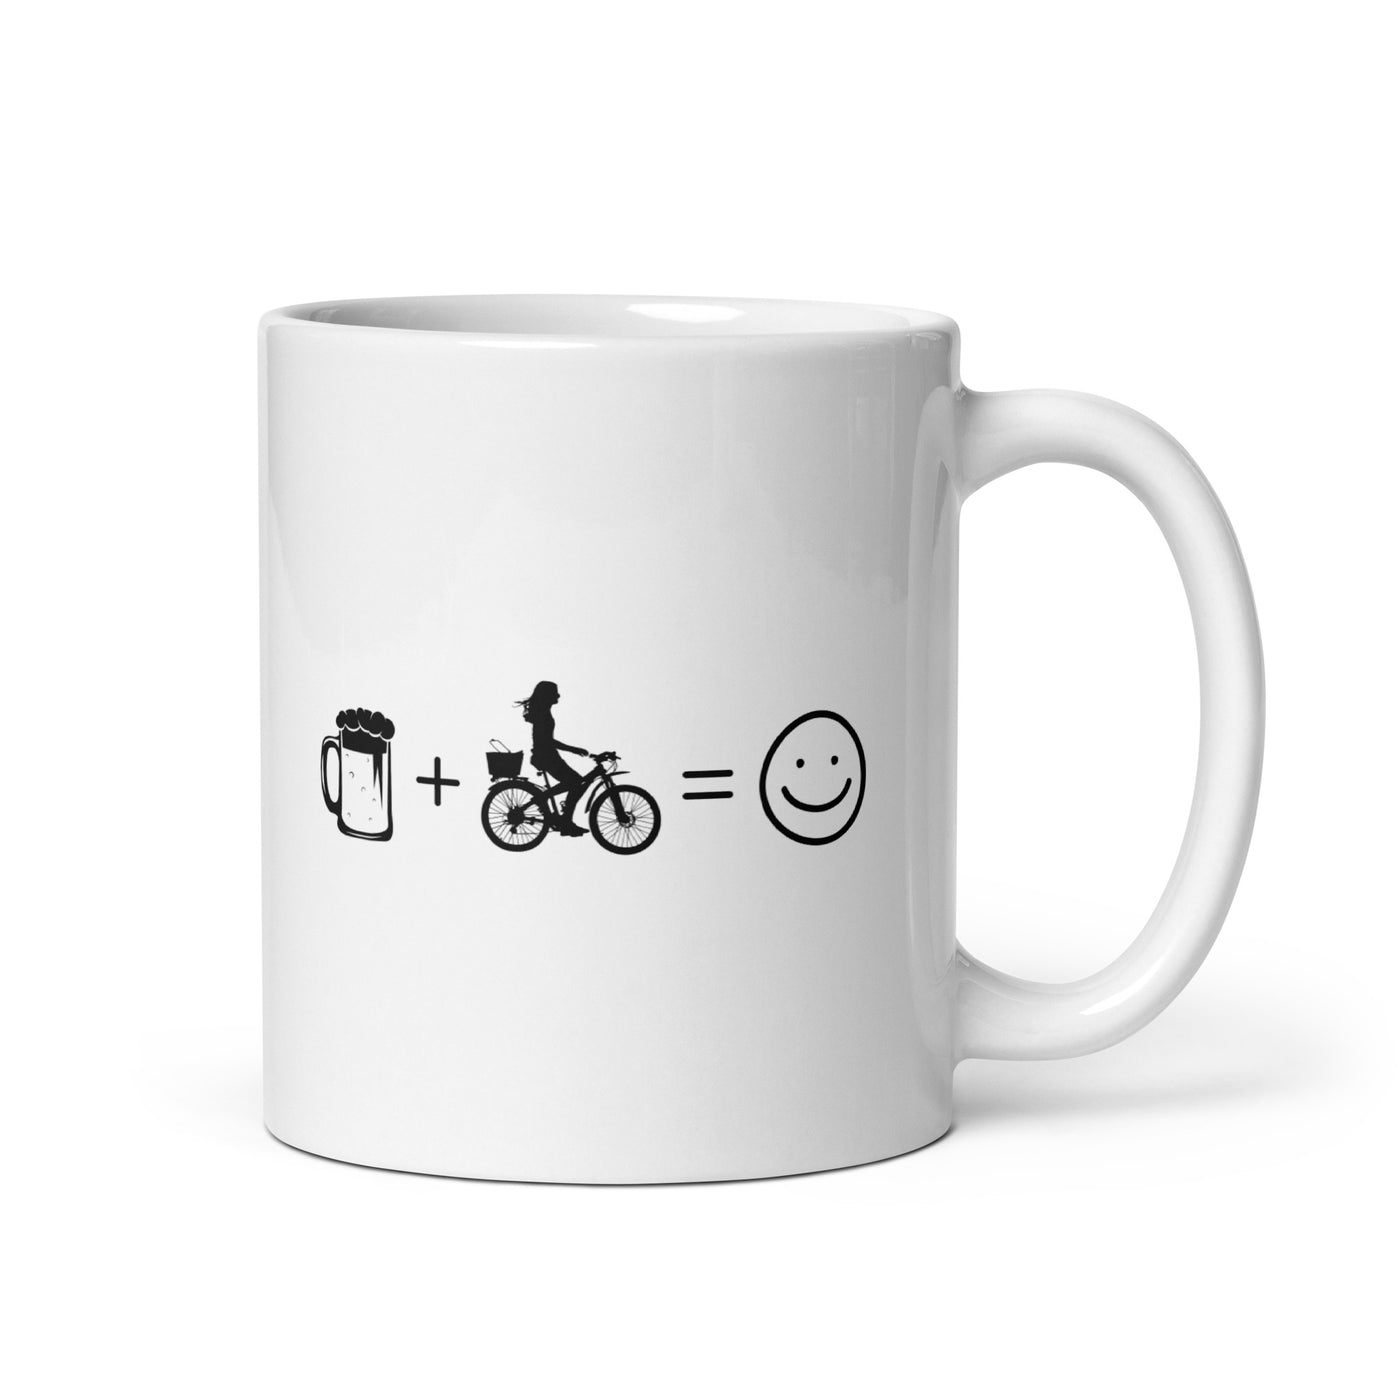 Beer Smile Face And Cycling 2 - Tasse fahrrad